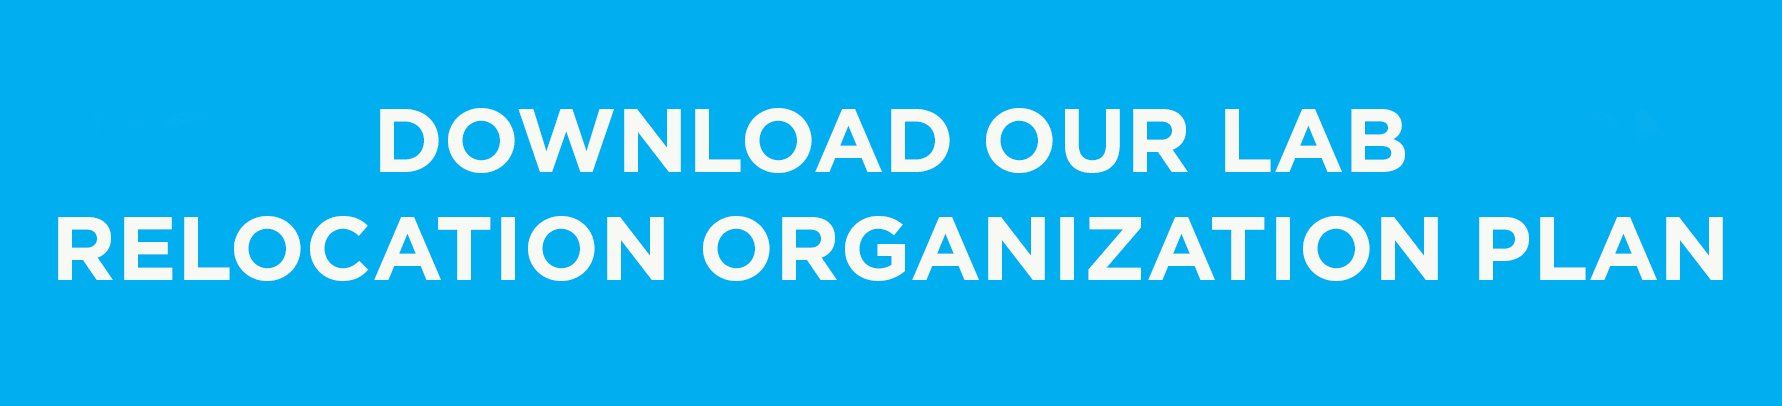 Download the lab relocation organization plan